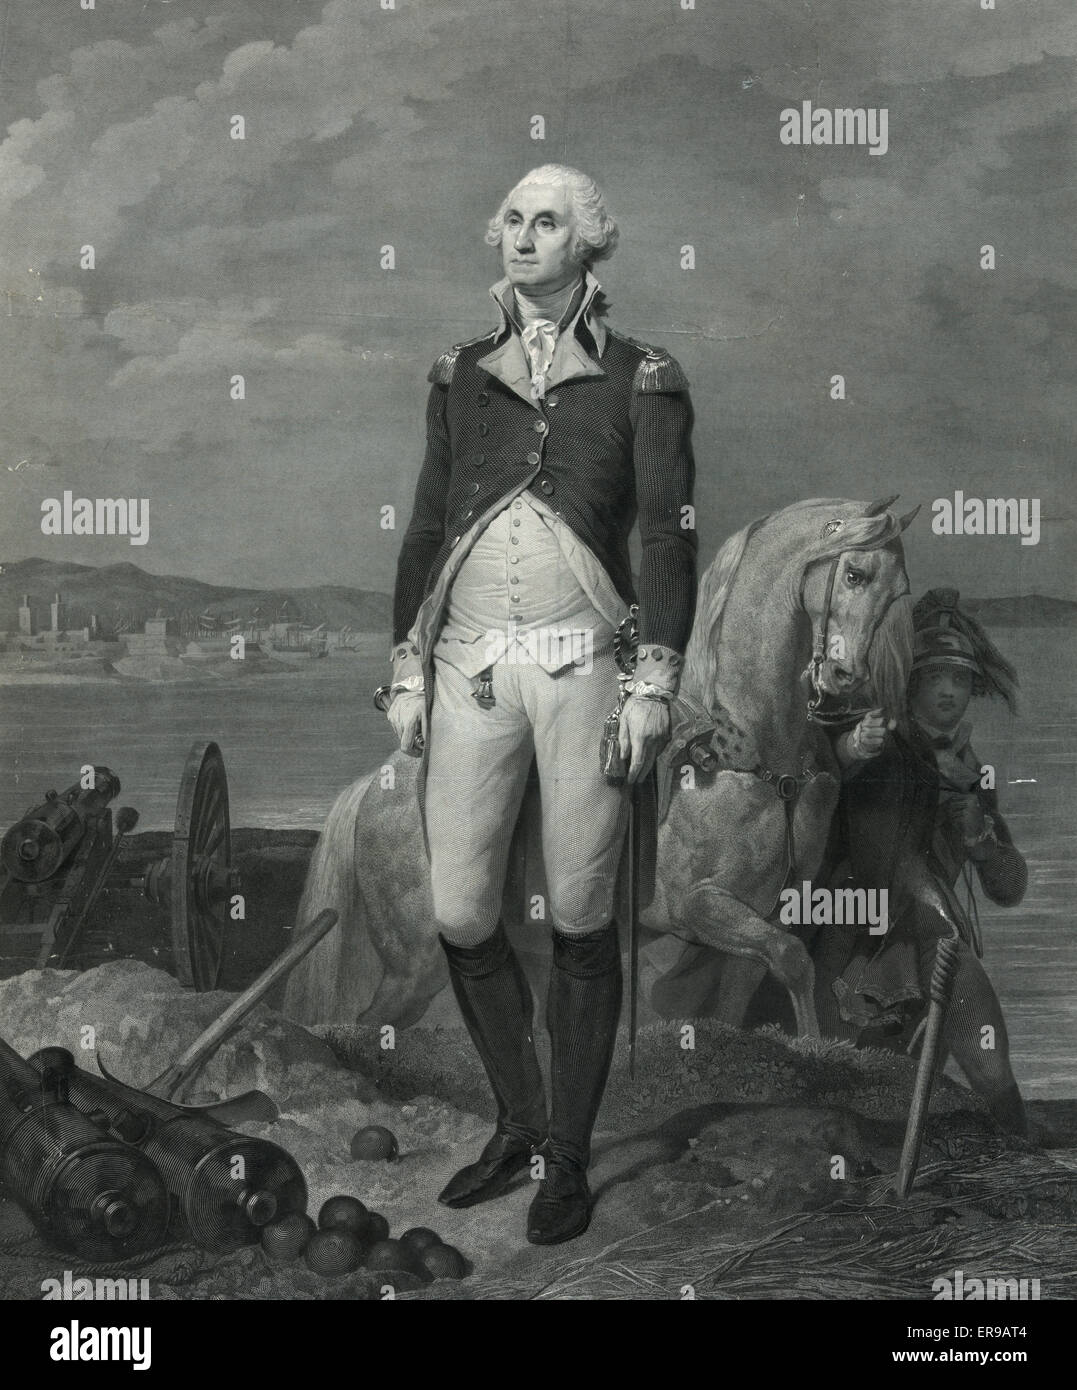 Washington. George Washington, portrait, standing on bunker, wearing military uniform, aide with horse in near background, view of port in distance. Stock Photo